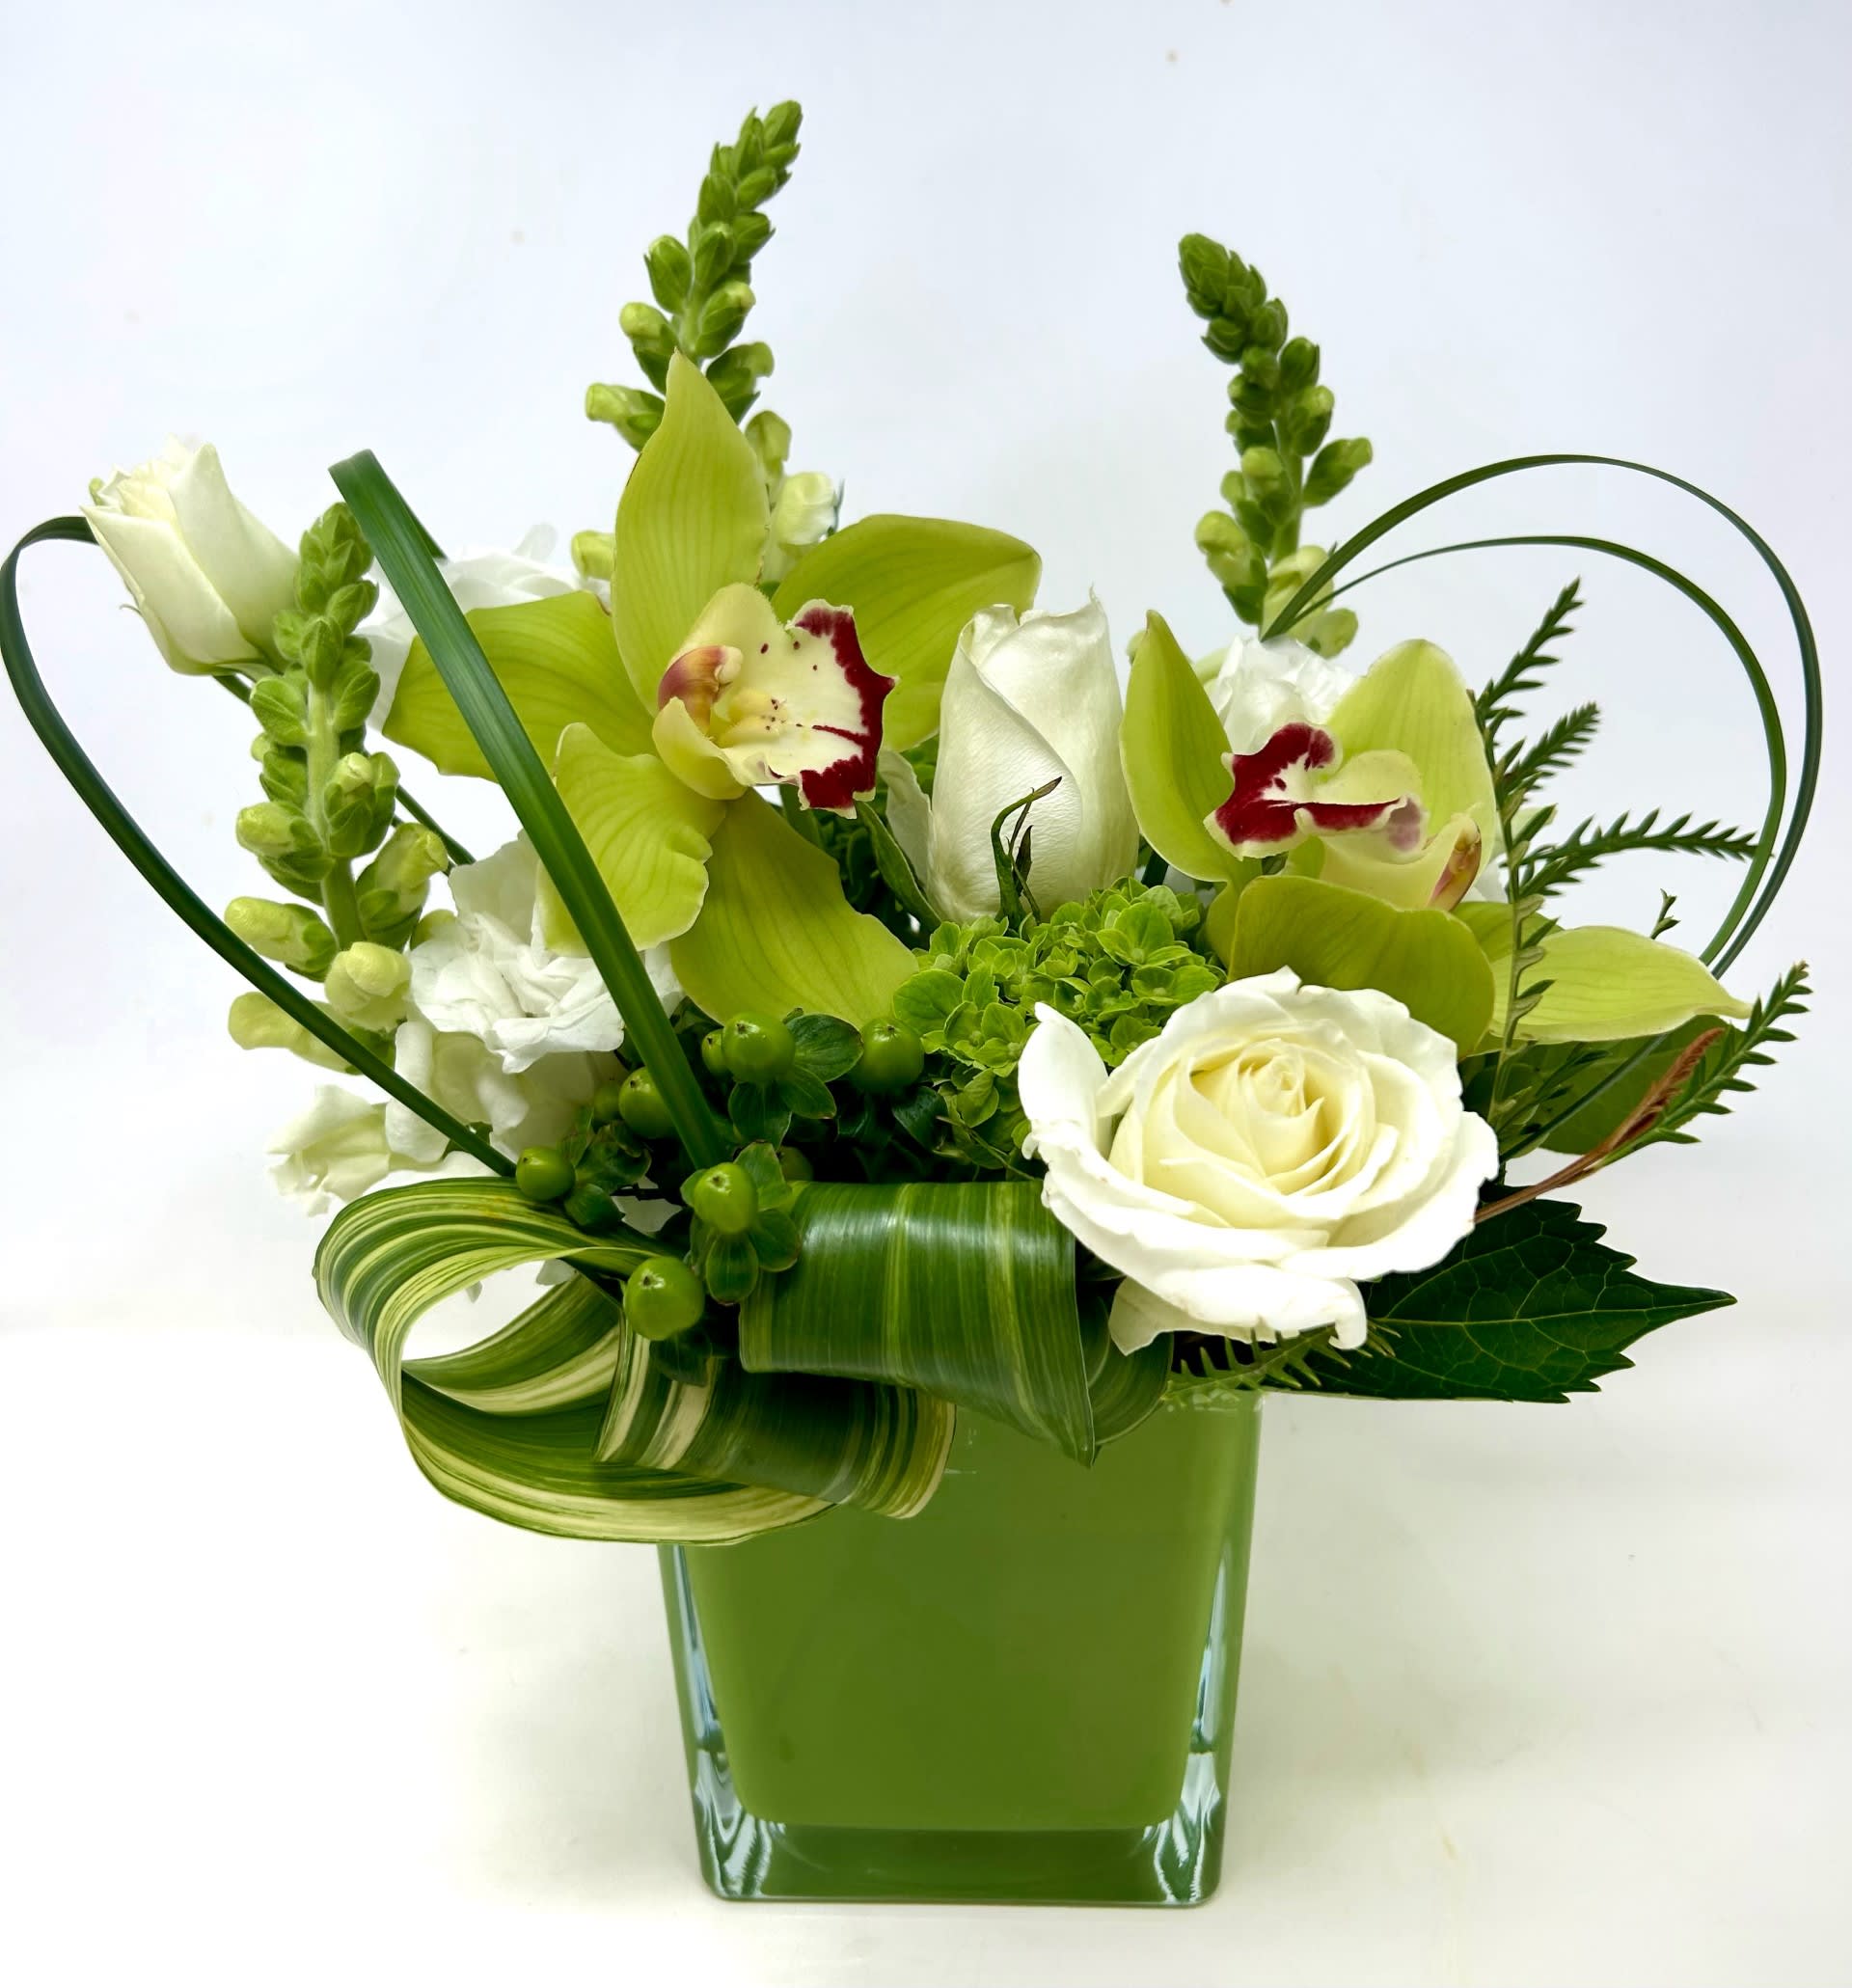 Lime Light - Monochromic arrangement of whites &amp; greens in a green glass cube. Featuring green cymbidium orchids and white roses. 